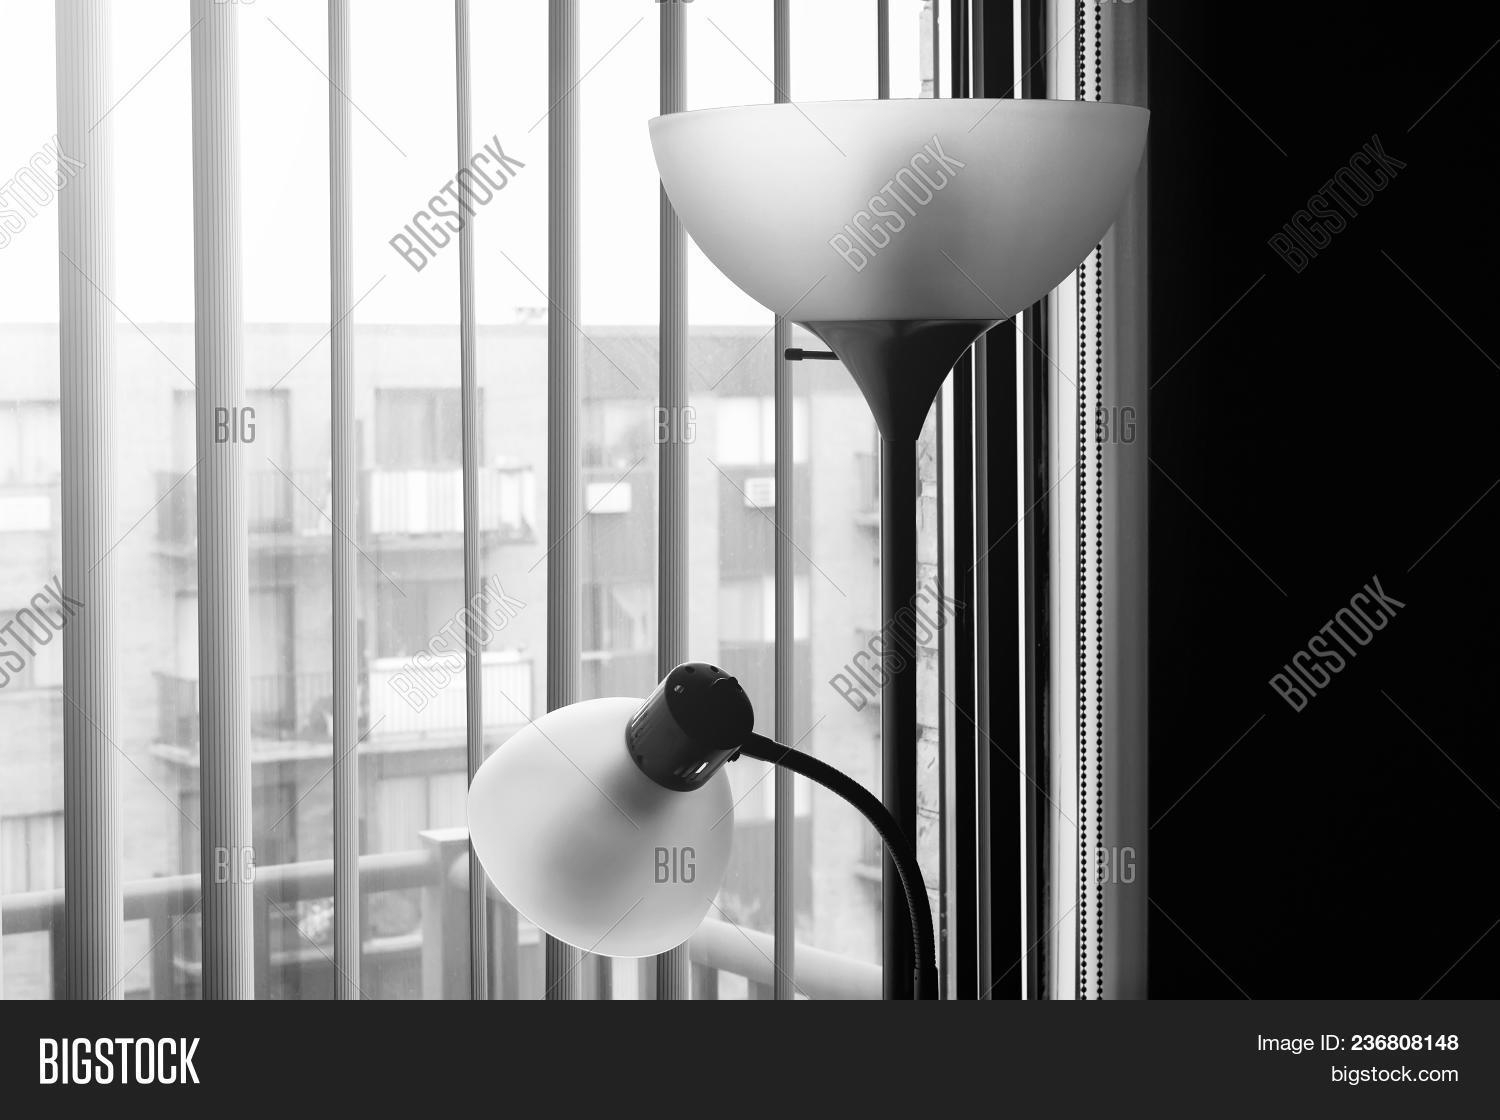 Fancy Floor Lamps Image Photo Free Trial Bigstock throughout sizing 1500 X 1120